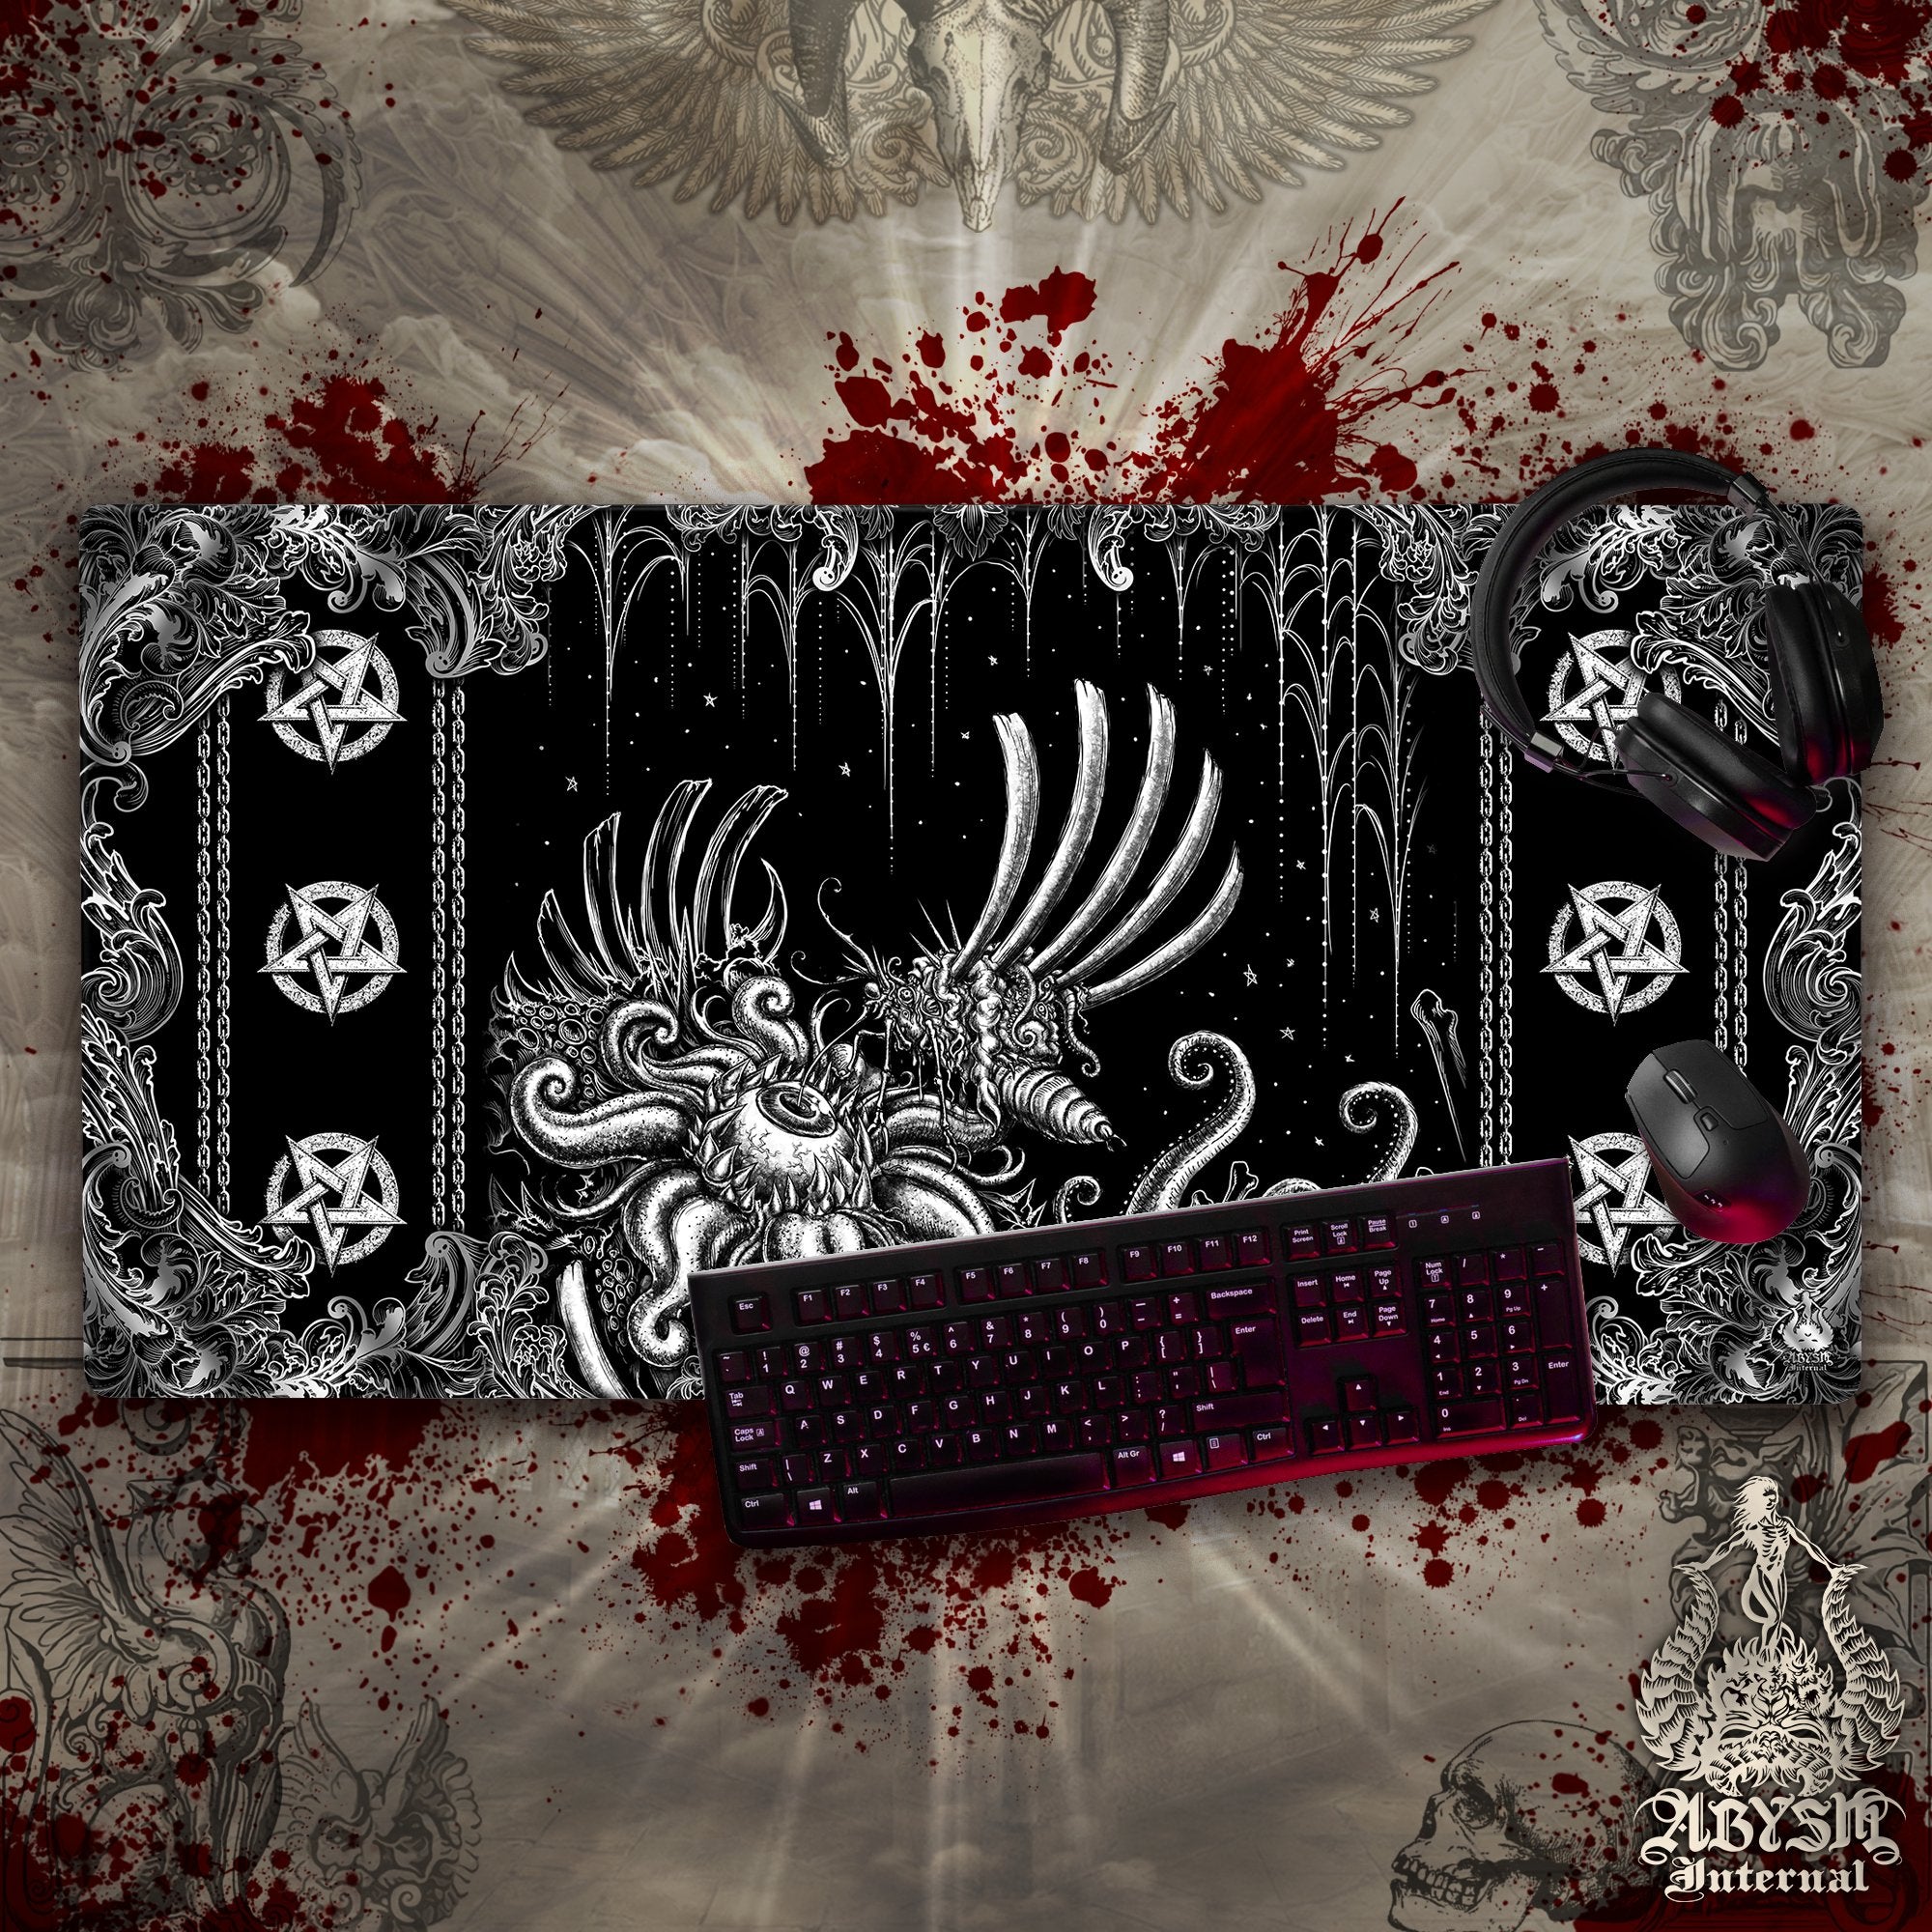 Horror Gaming Mouse Pad, Goth Hell Desk Mat, Gothic Table Protector Cover, Gore and Blood Workpad, Dark Fantasy Art Print - Pentagrams, Bloodfly - Abysm Internal